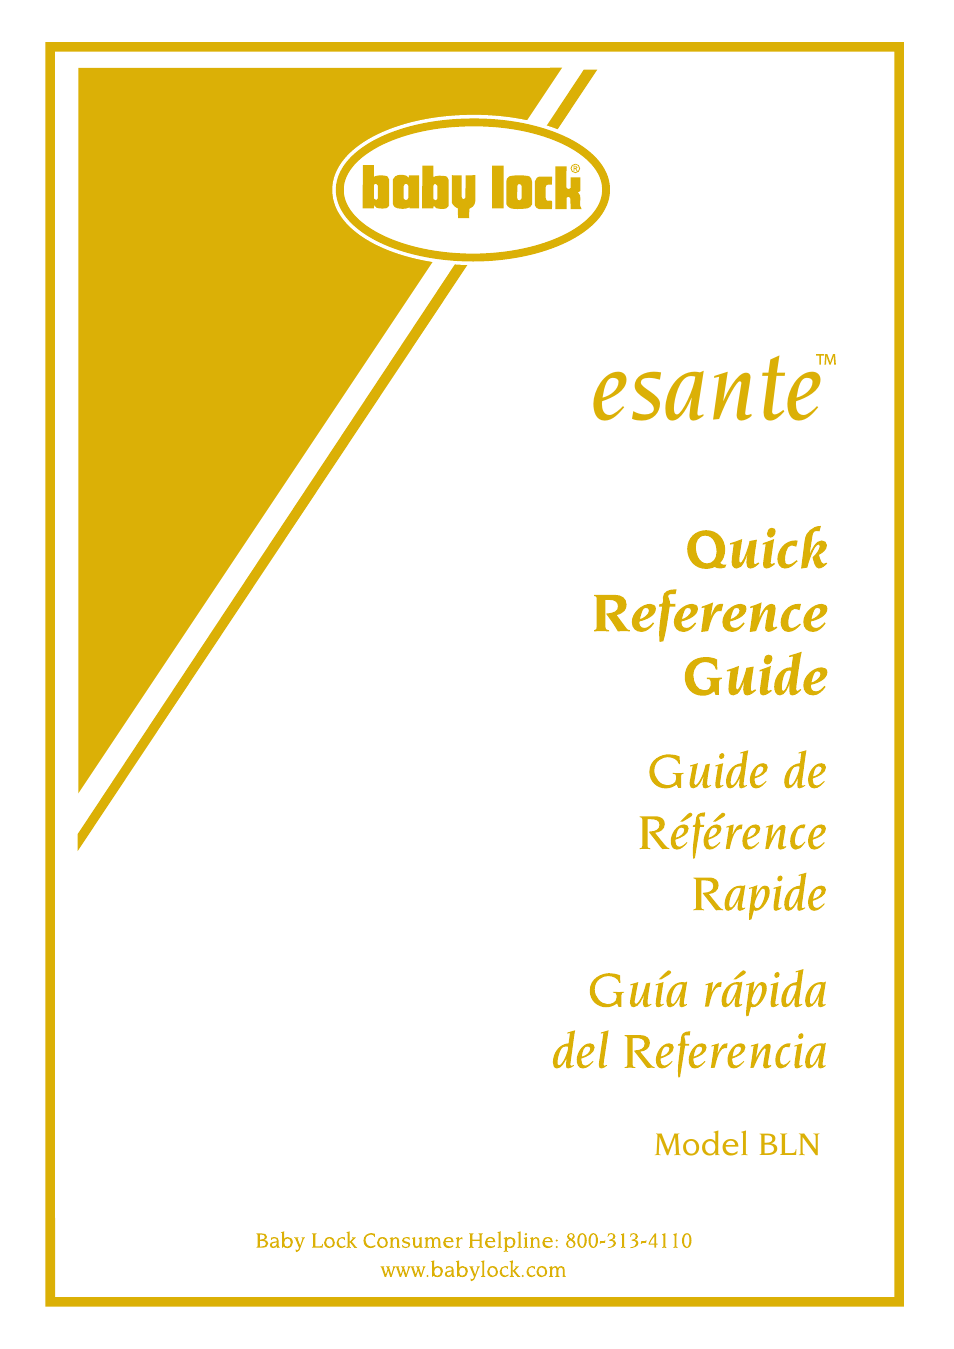 Esante (BLN) Quick Reference Guide